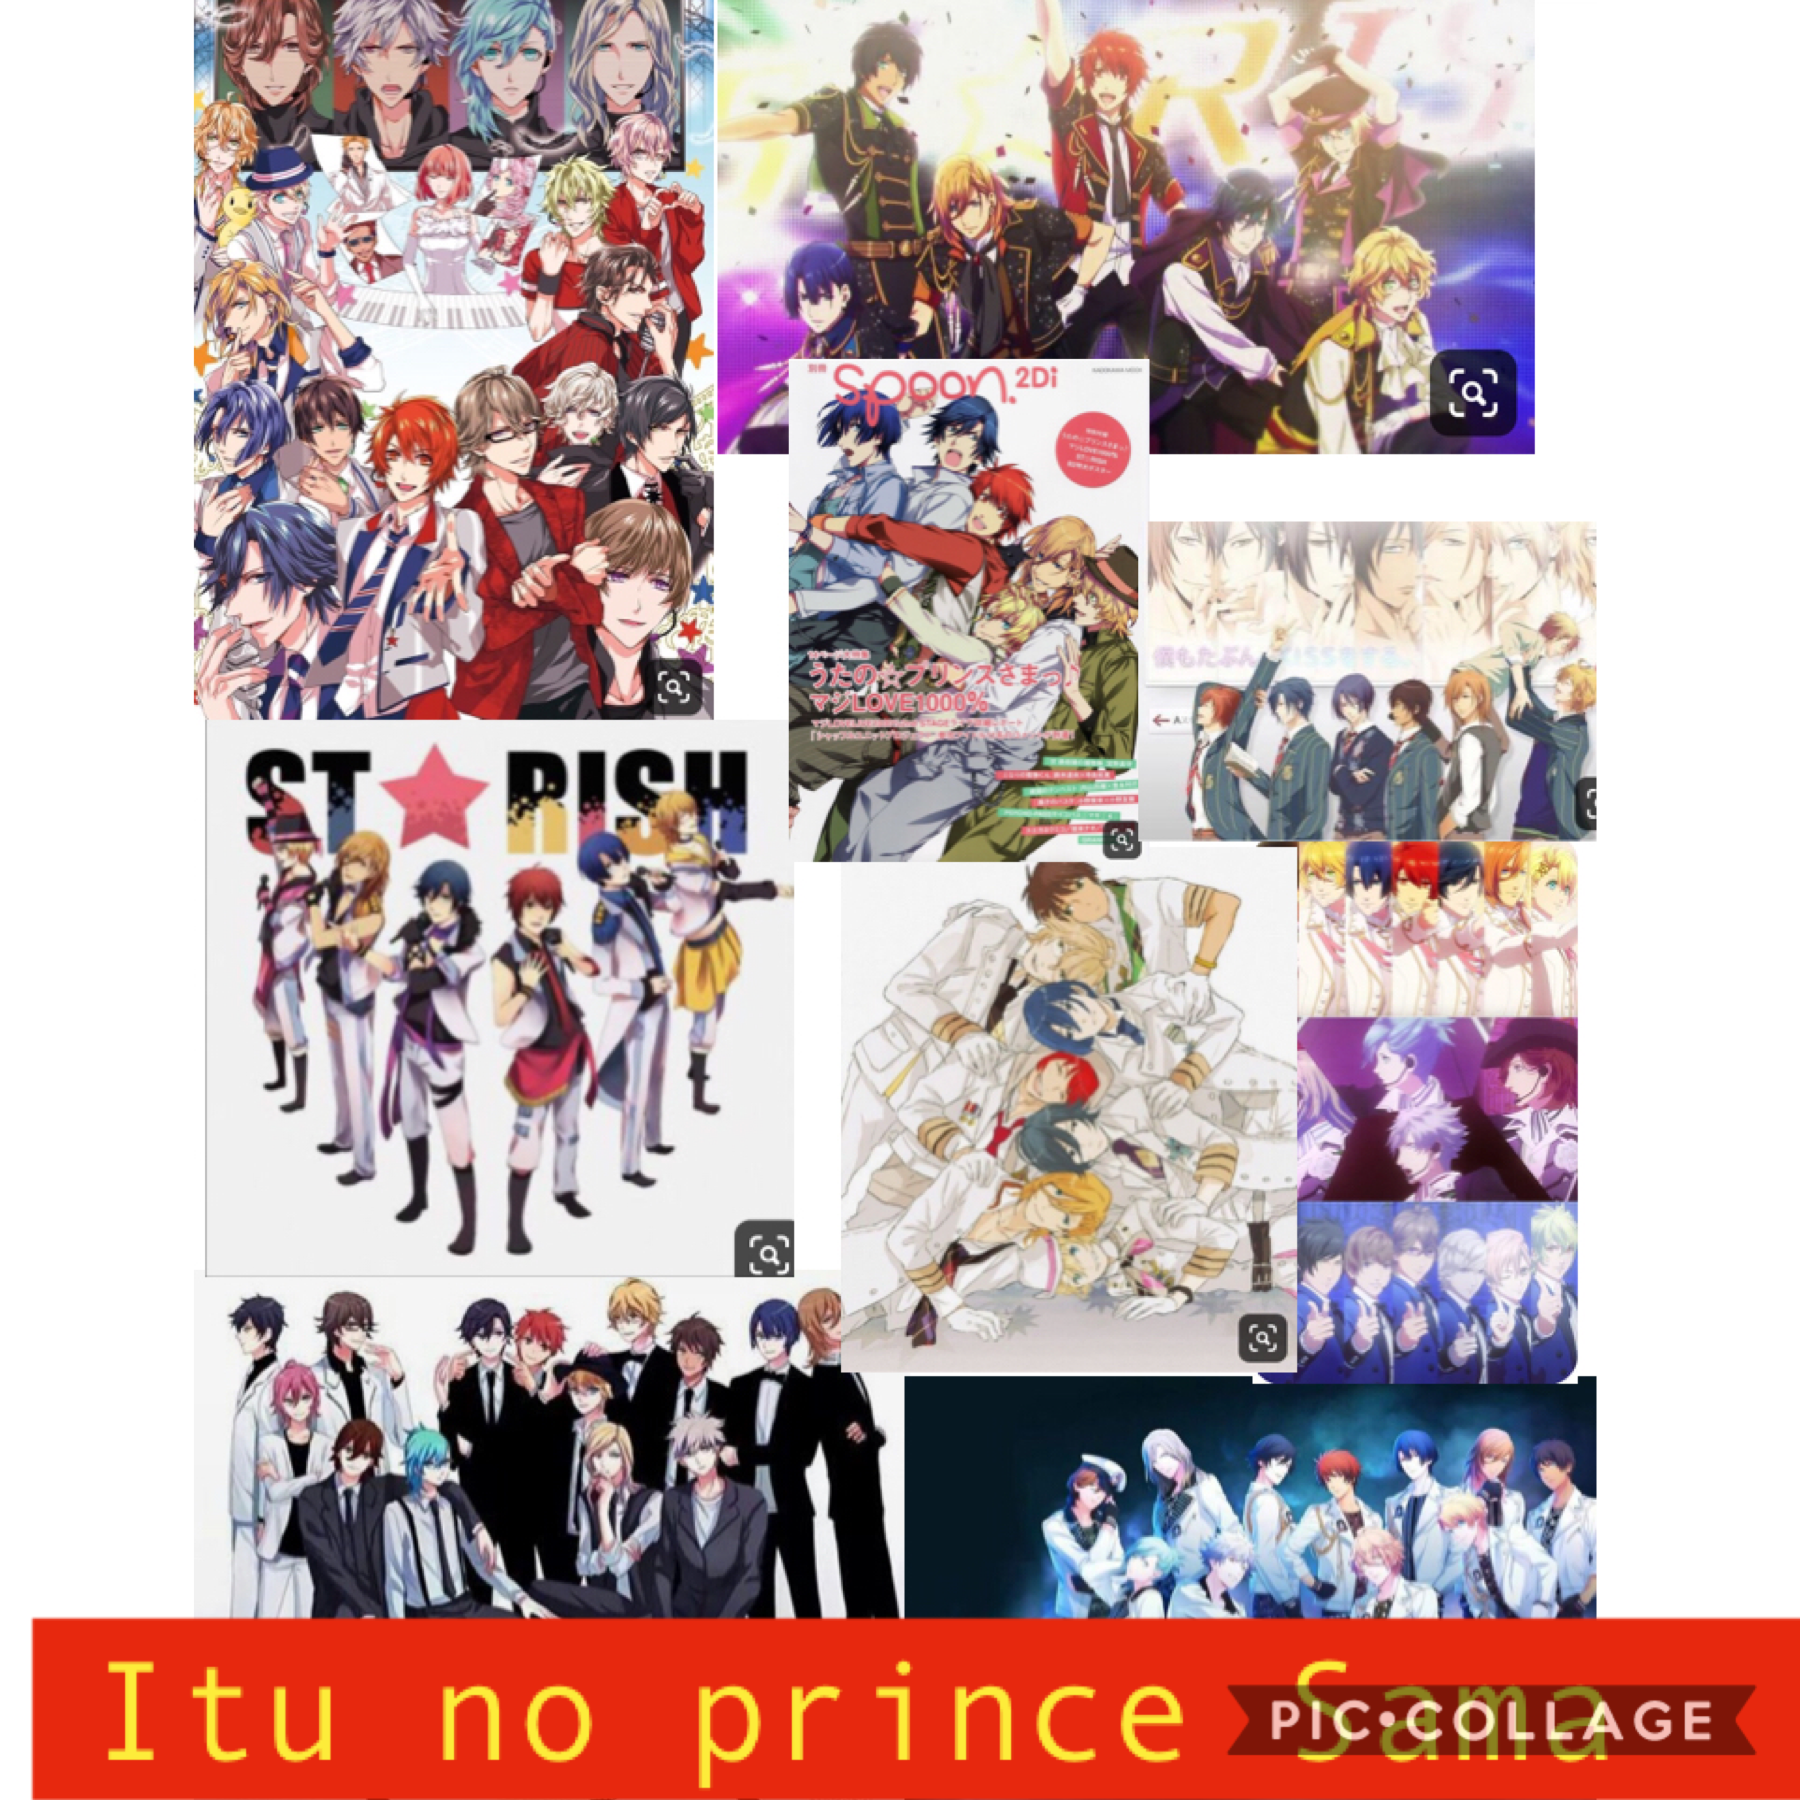 Uta no prince Sama is one of the best anime’s please watch you won’t regret it. It’s on Hulu and crunchy roll please watch!